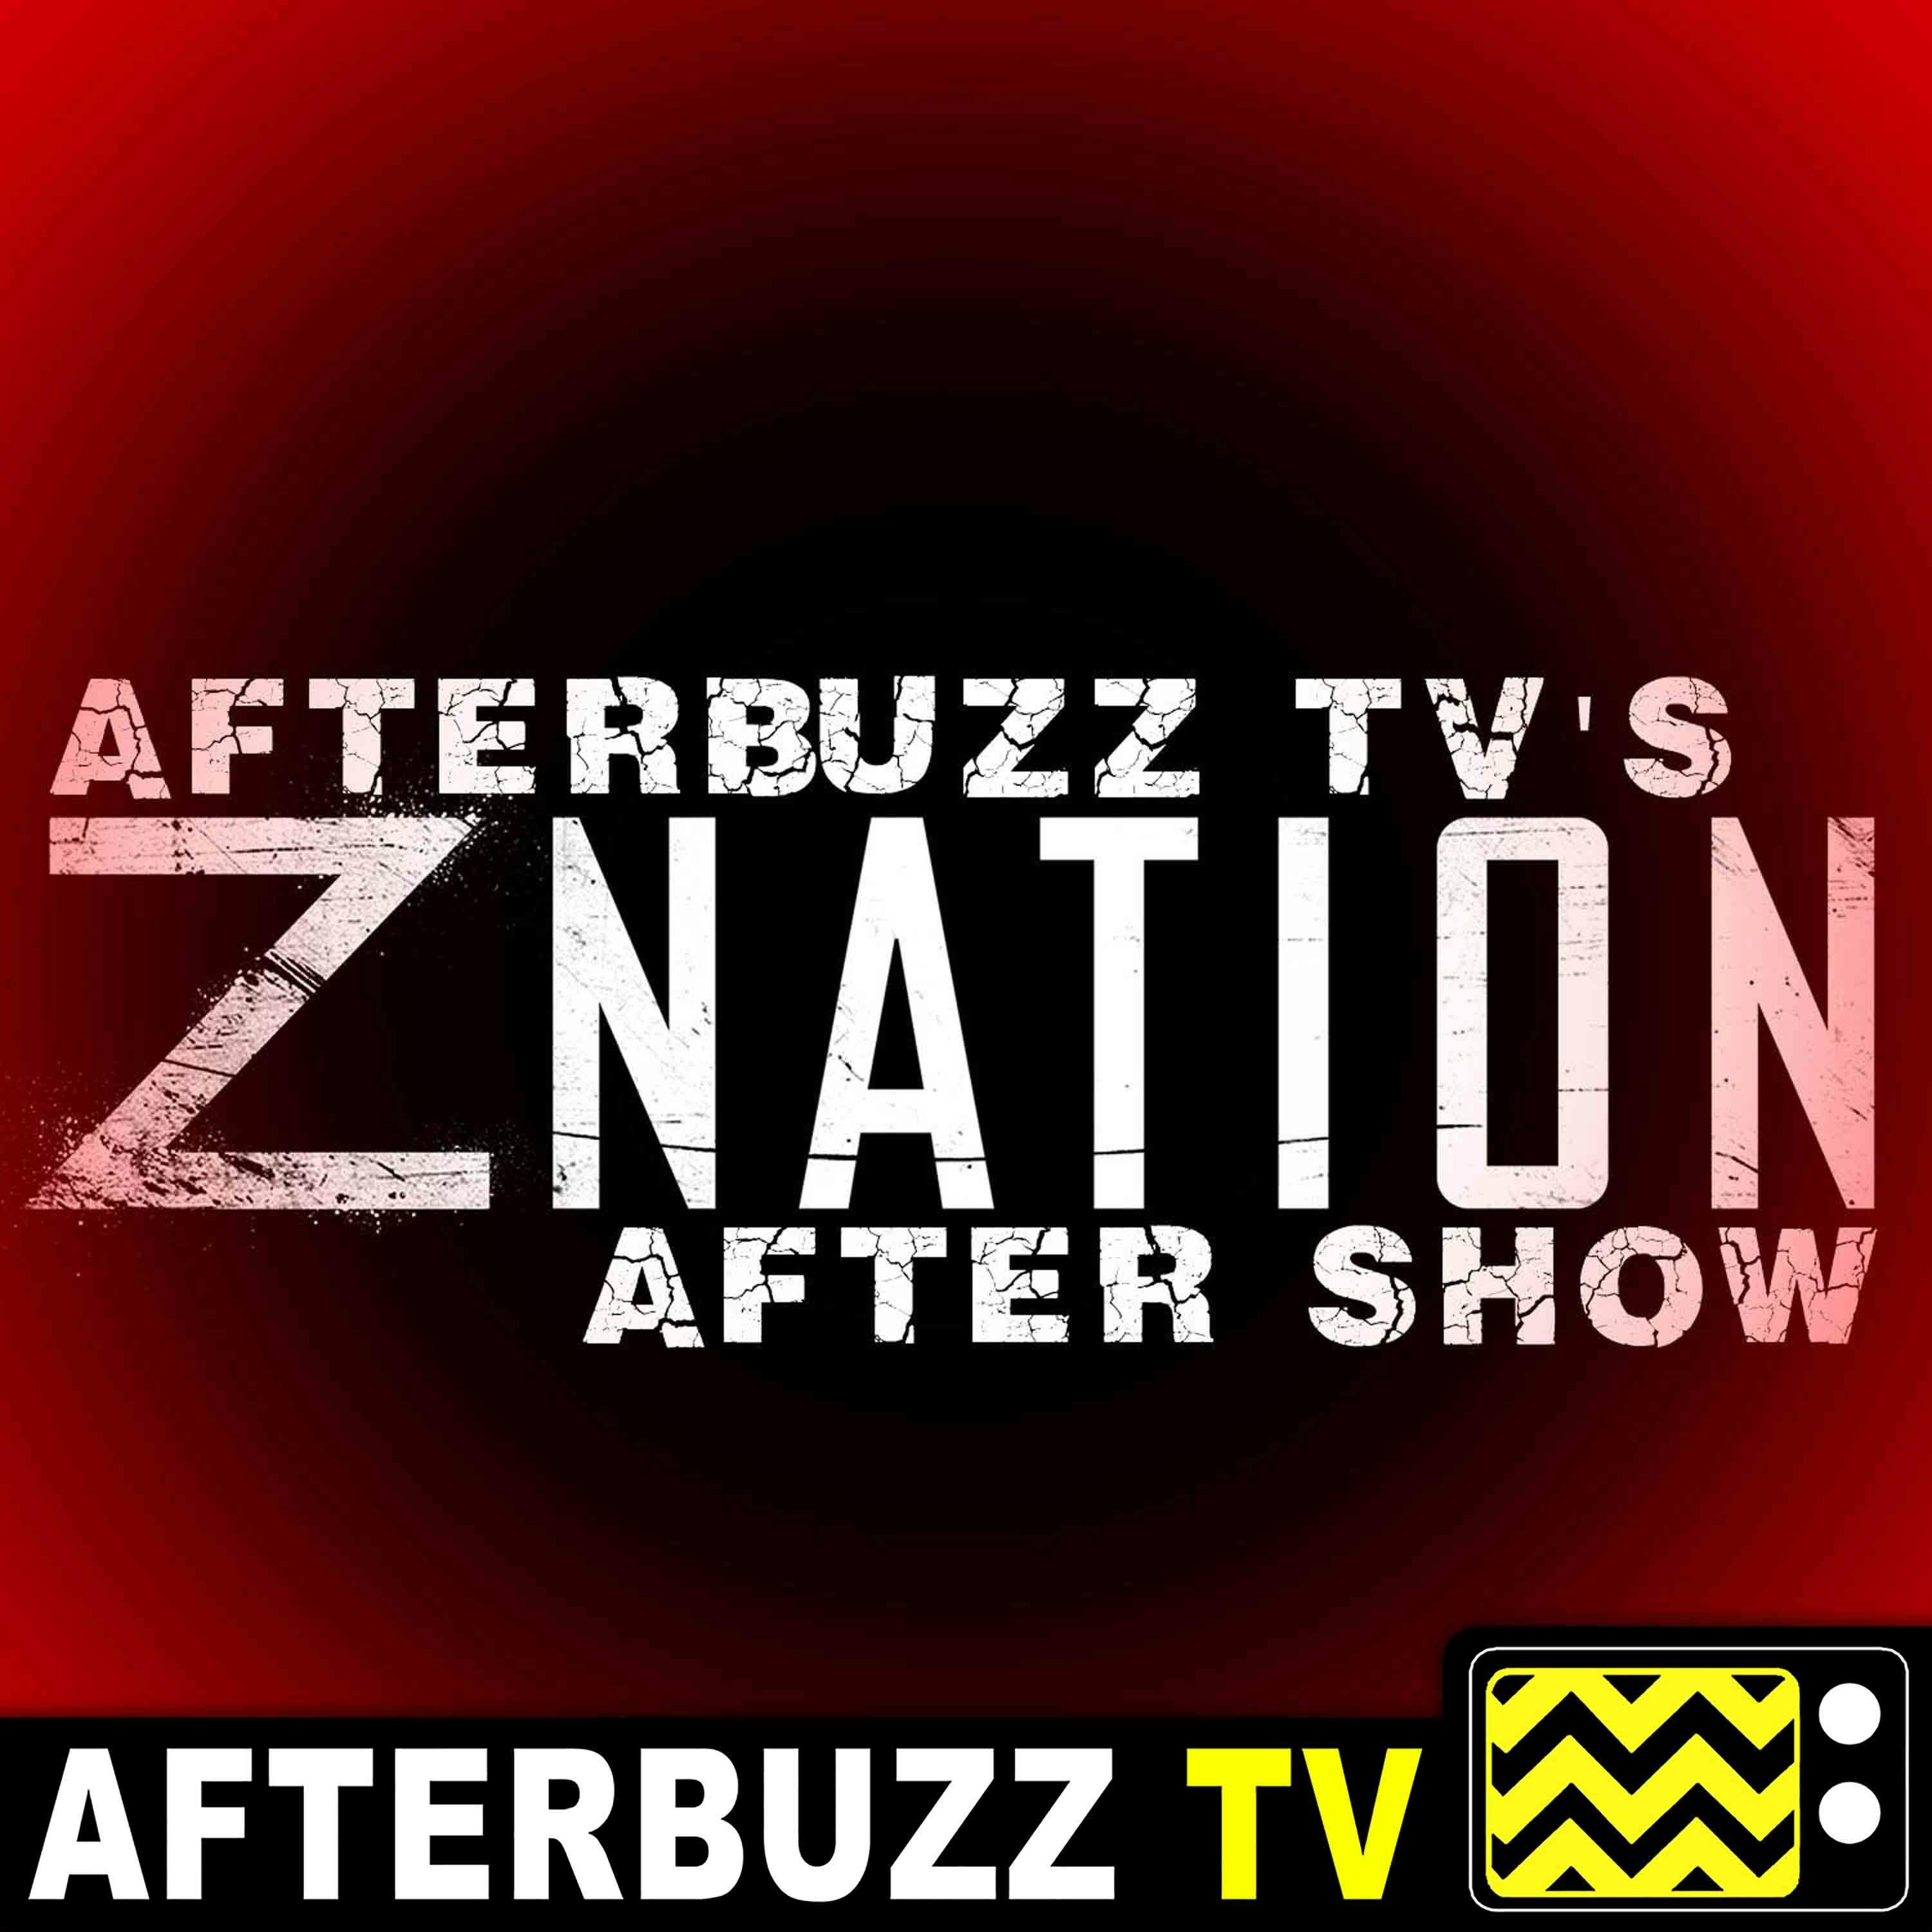 Z Nation S:4 | Alexander Yellen Guests on Frenemies E:10 | AfterBuzz TV AfterShow